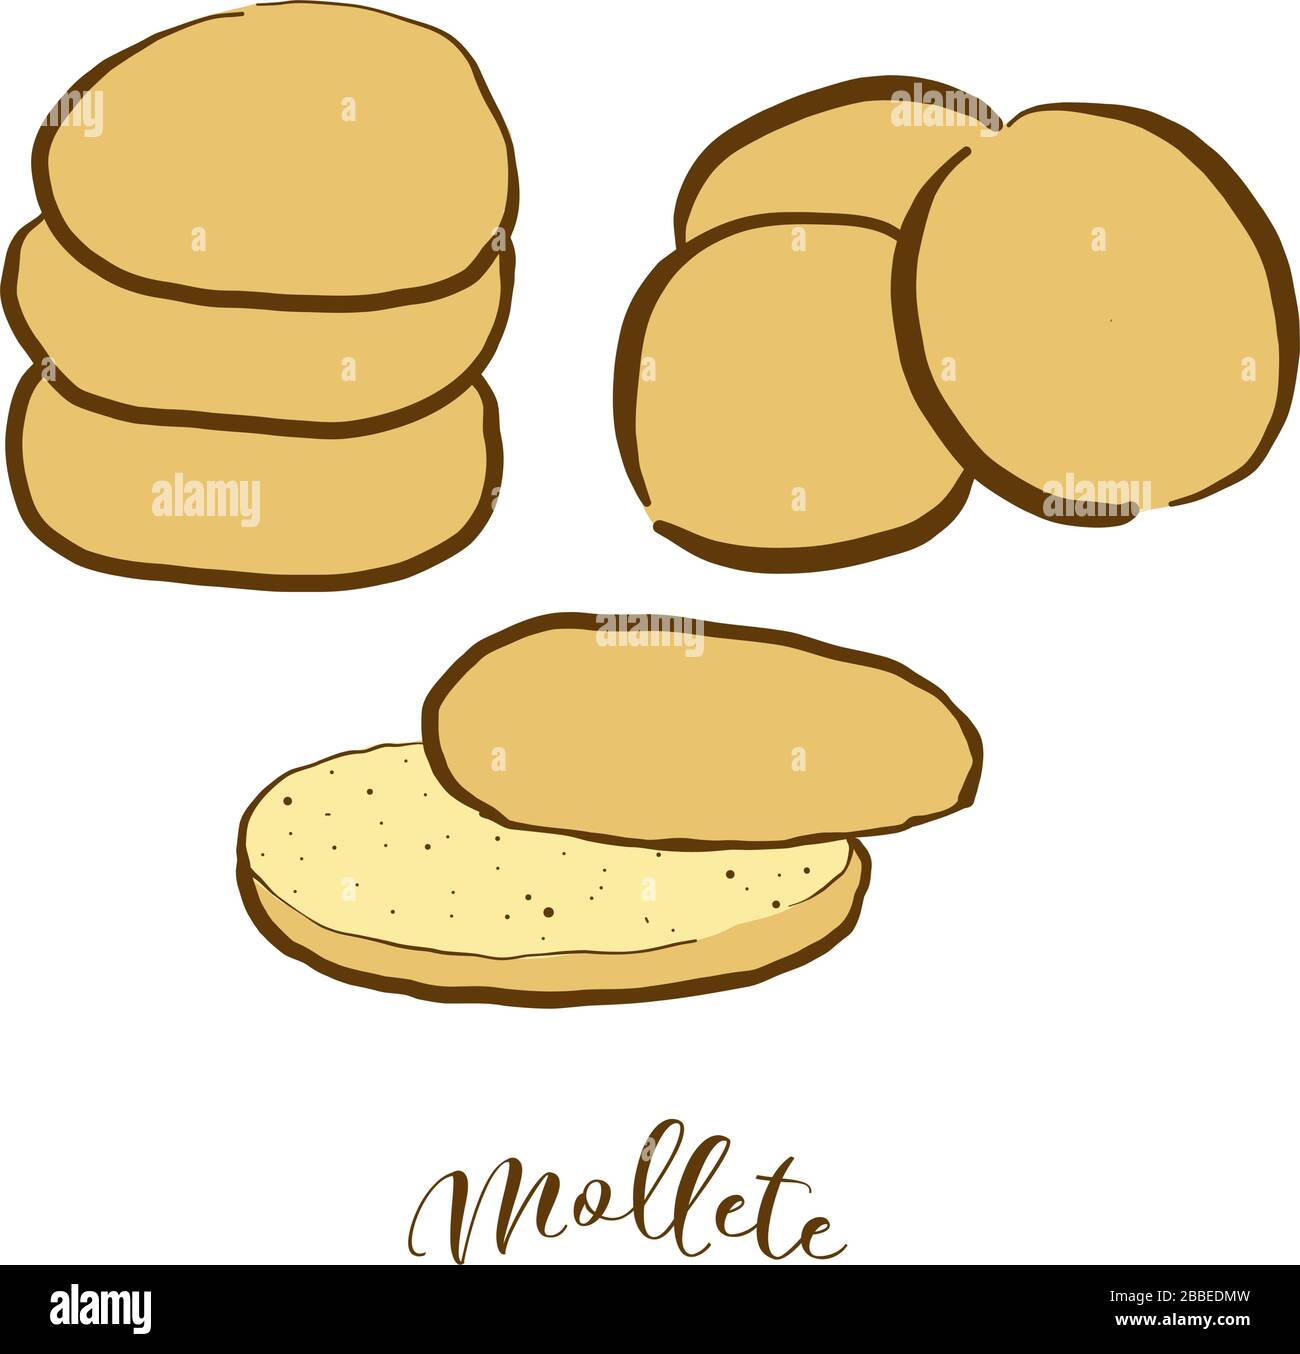 Colored drawing of Mollete bread. Vector illustration of Flatbread, White food, usually known in Andalusia, Spain. Colored Bread sketches. Stock Vector